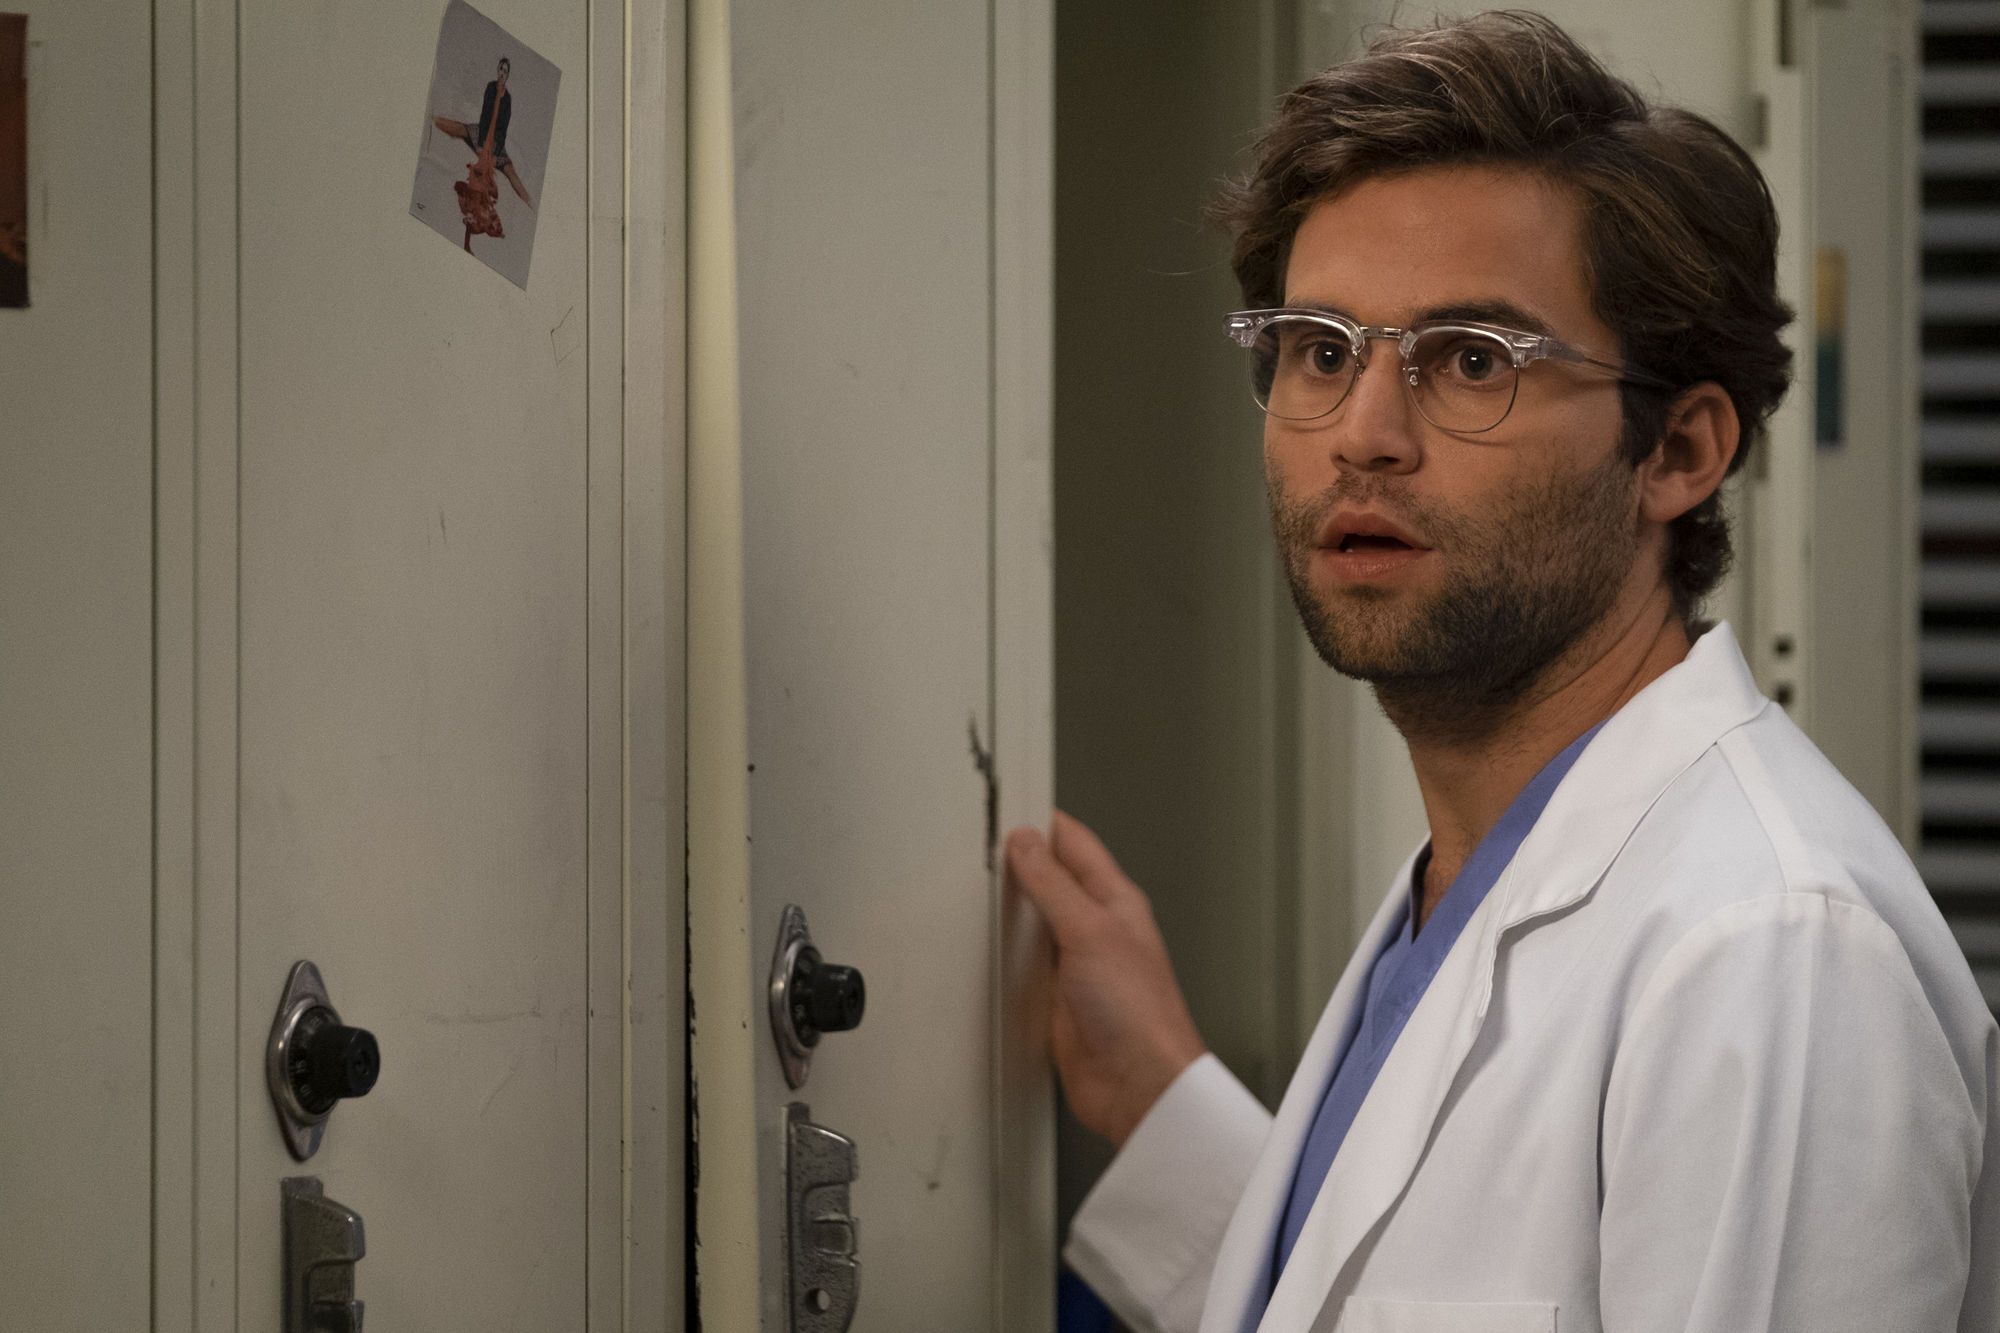 Grey's Anatomy LGBTQ+ storyline prompts star Jake Borelli to come out